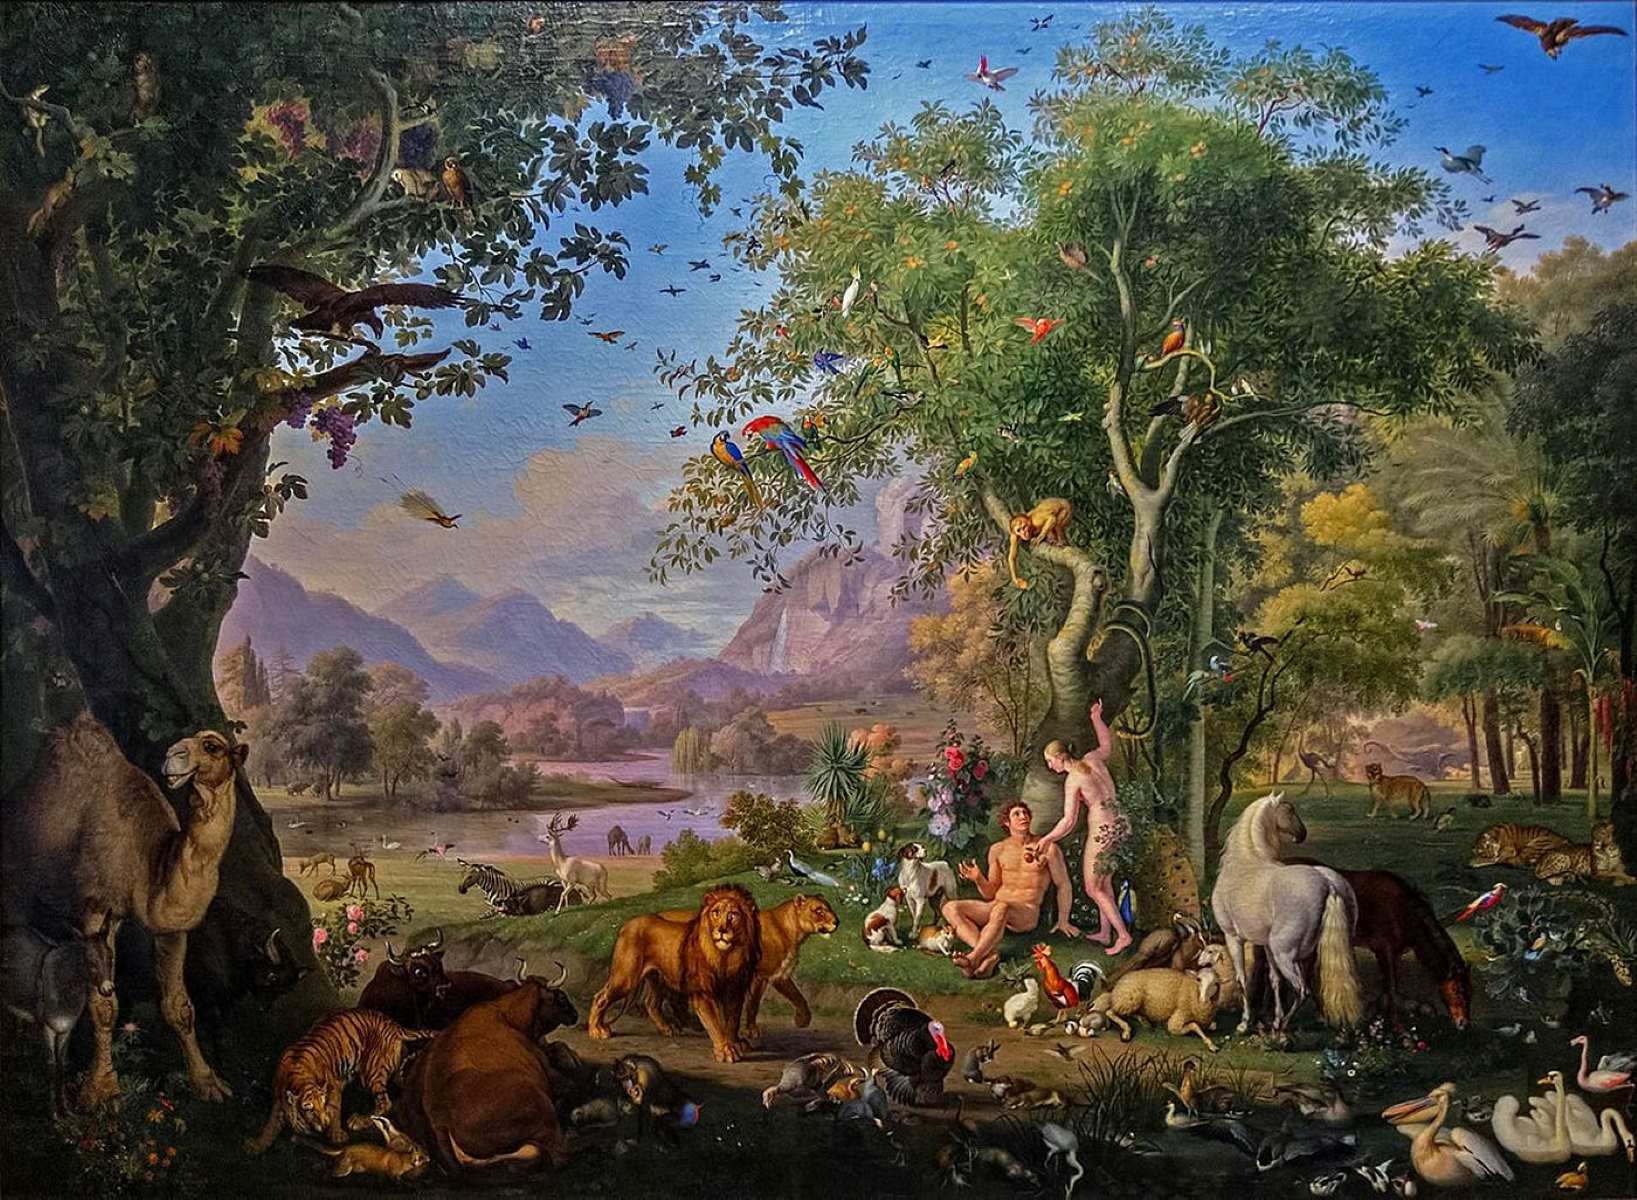 The Mysterious Fate Of The Garden Of Eden: What Really Happened After Adam And Eve’s Departure